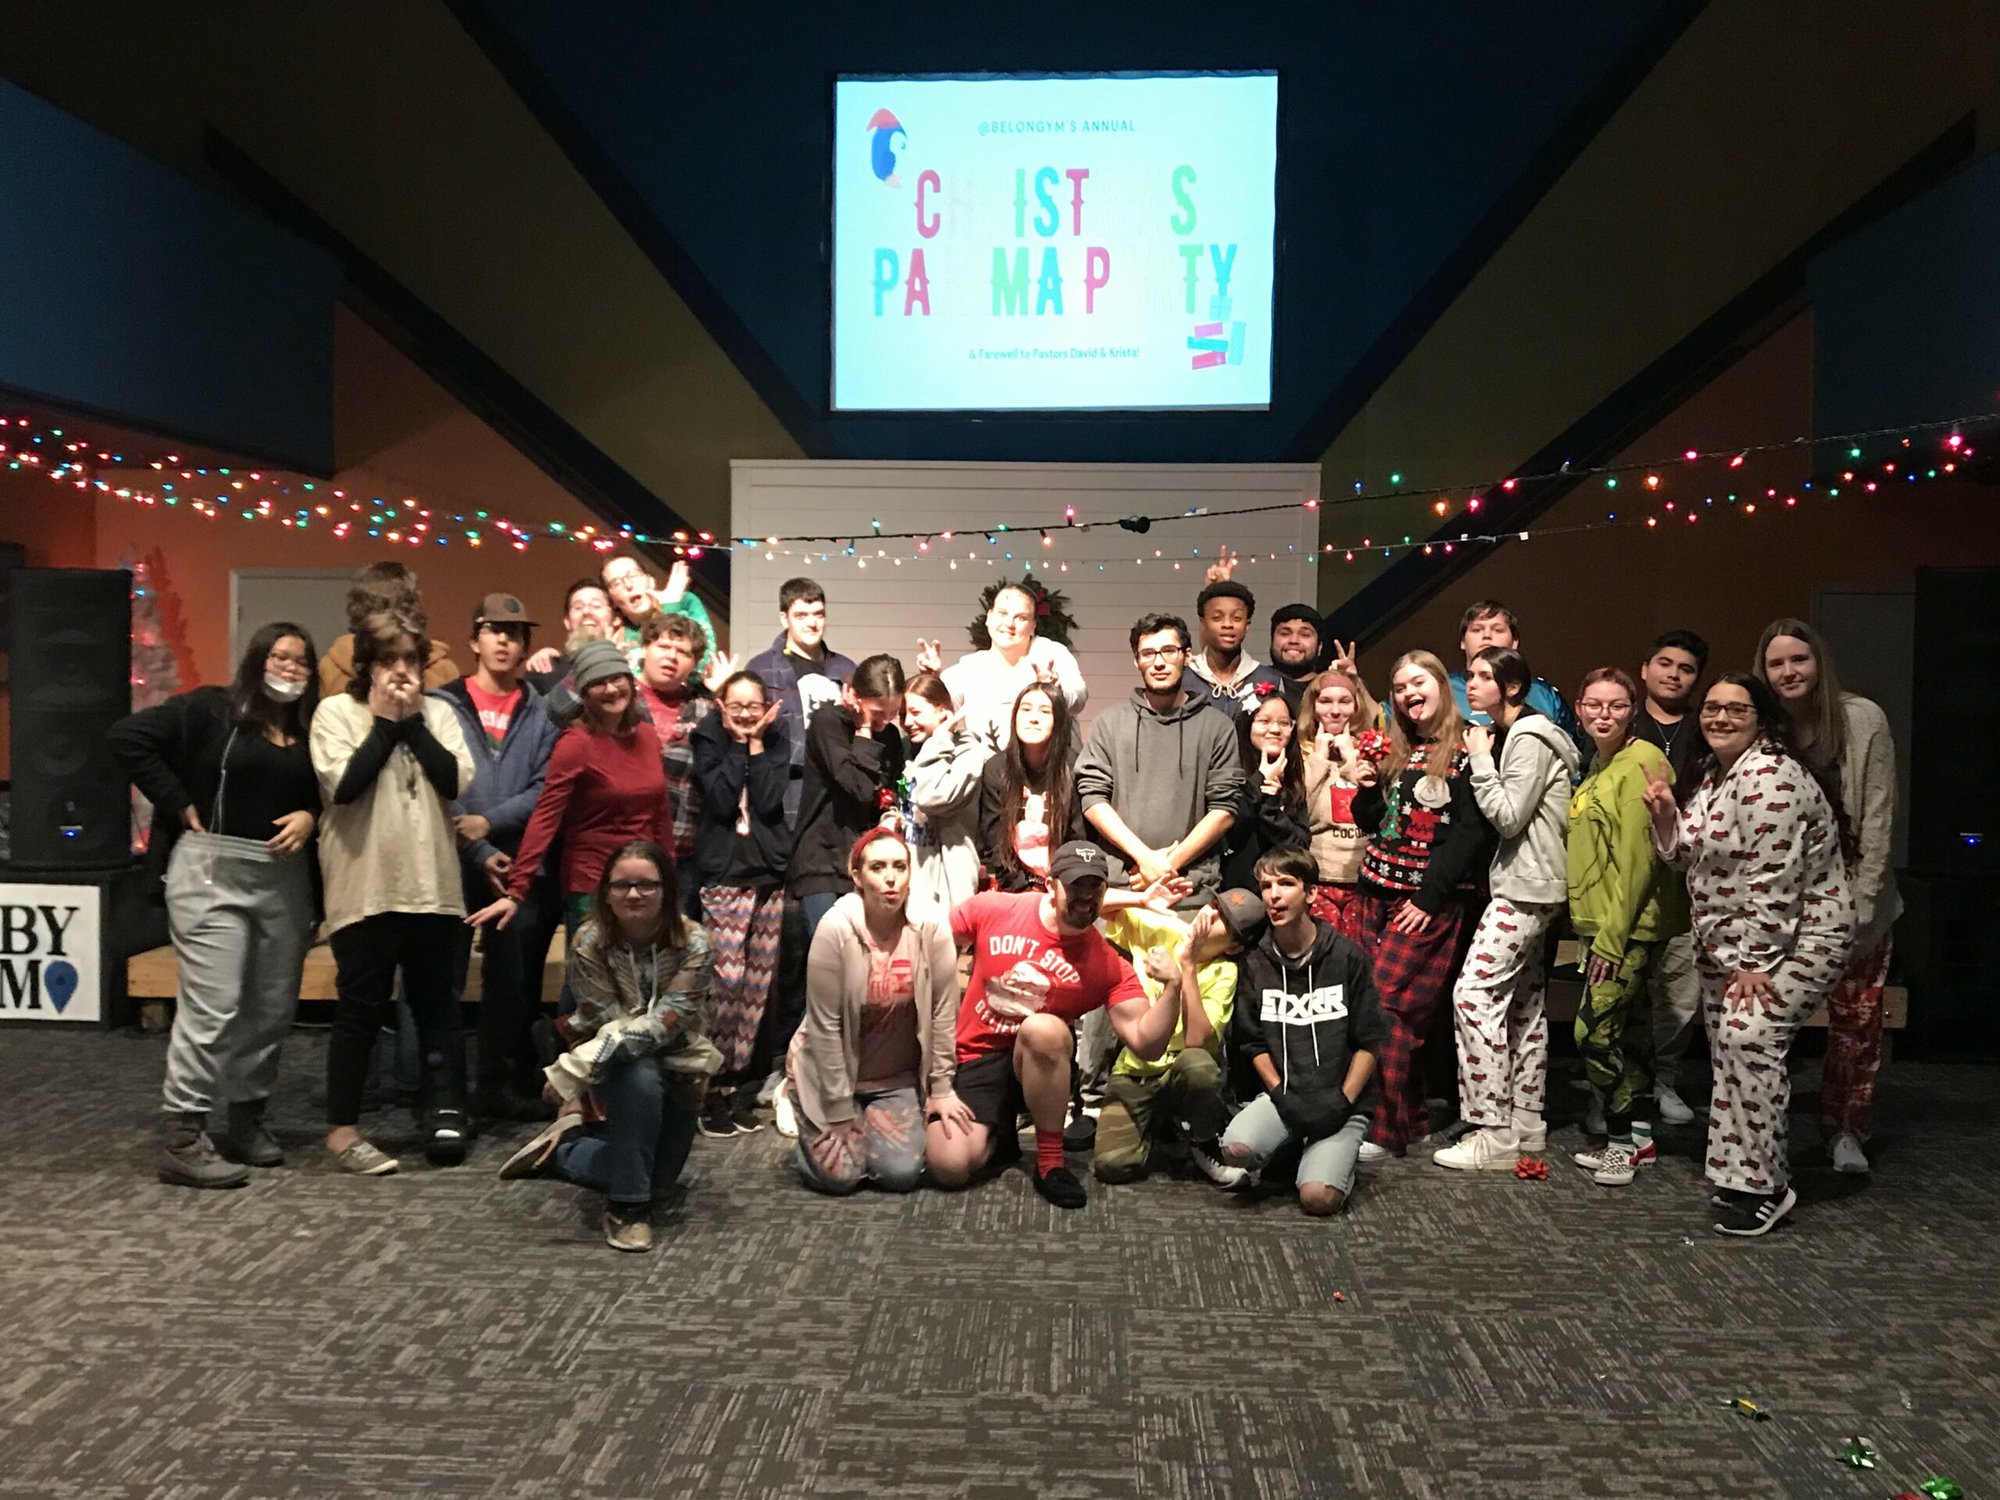 angleton first church – Belong Youth Ministry